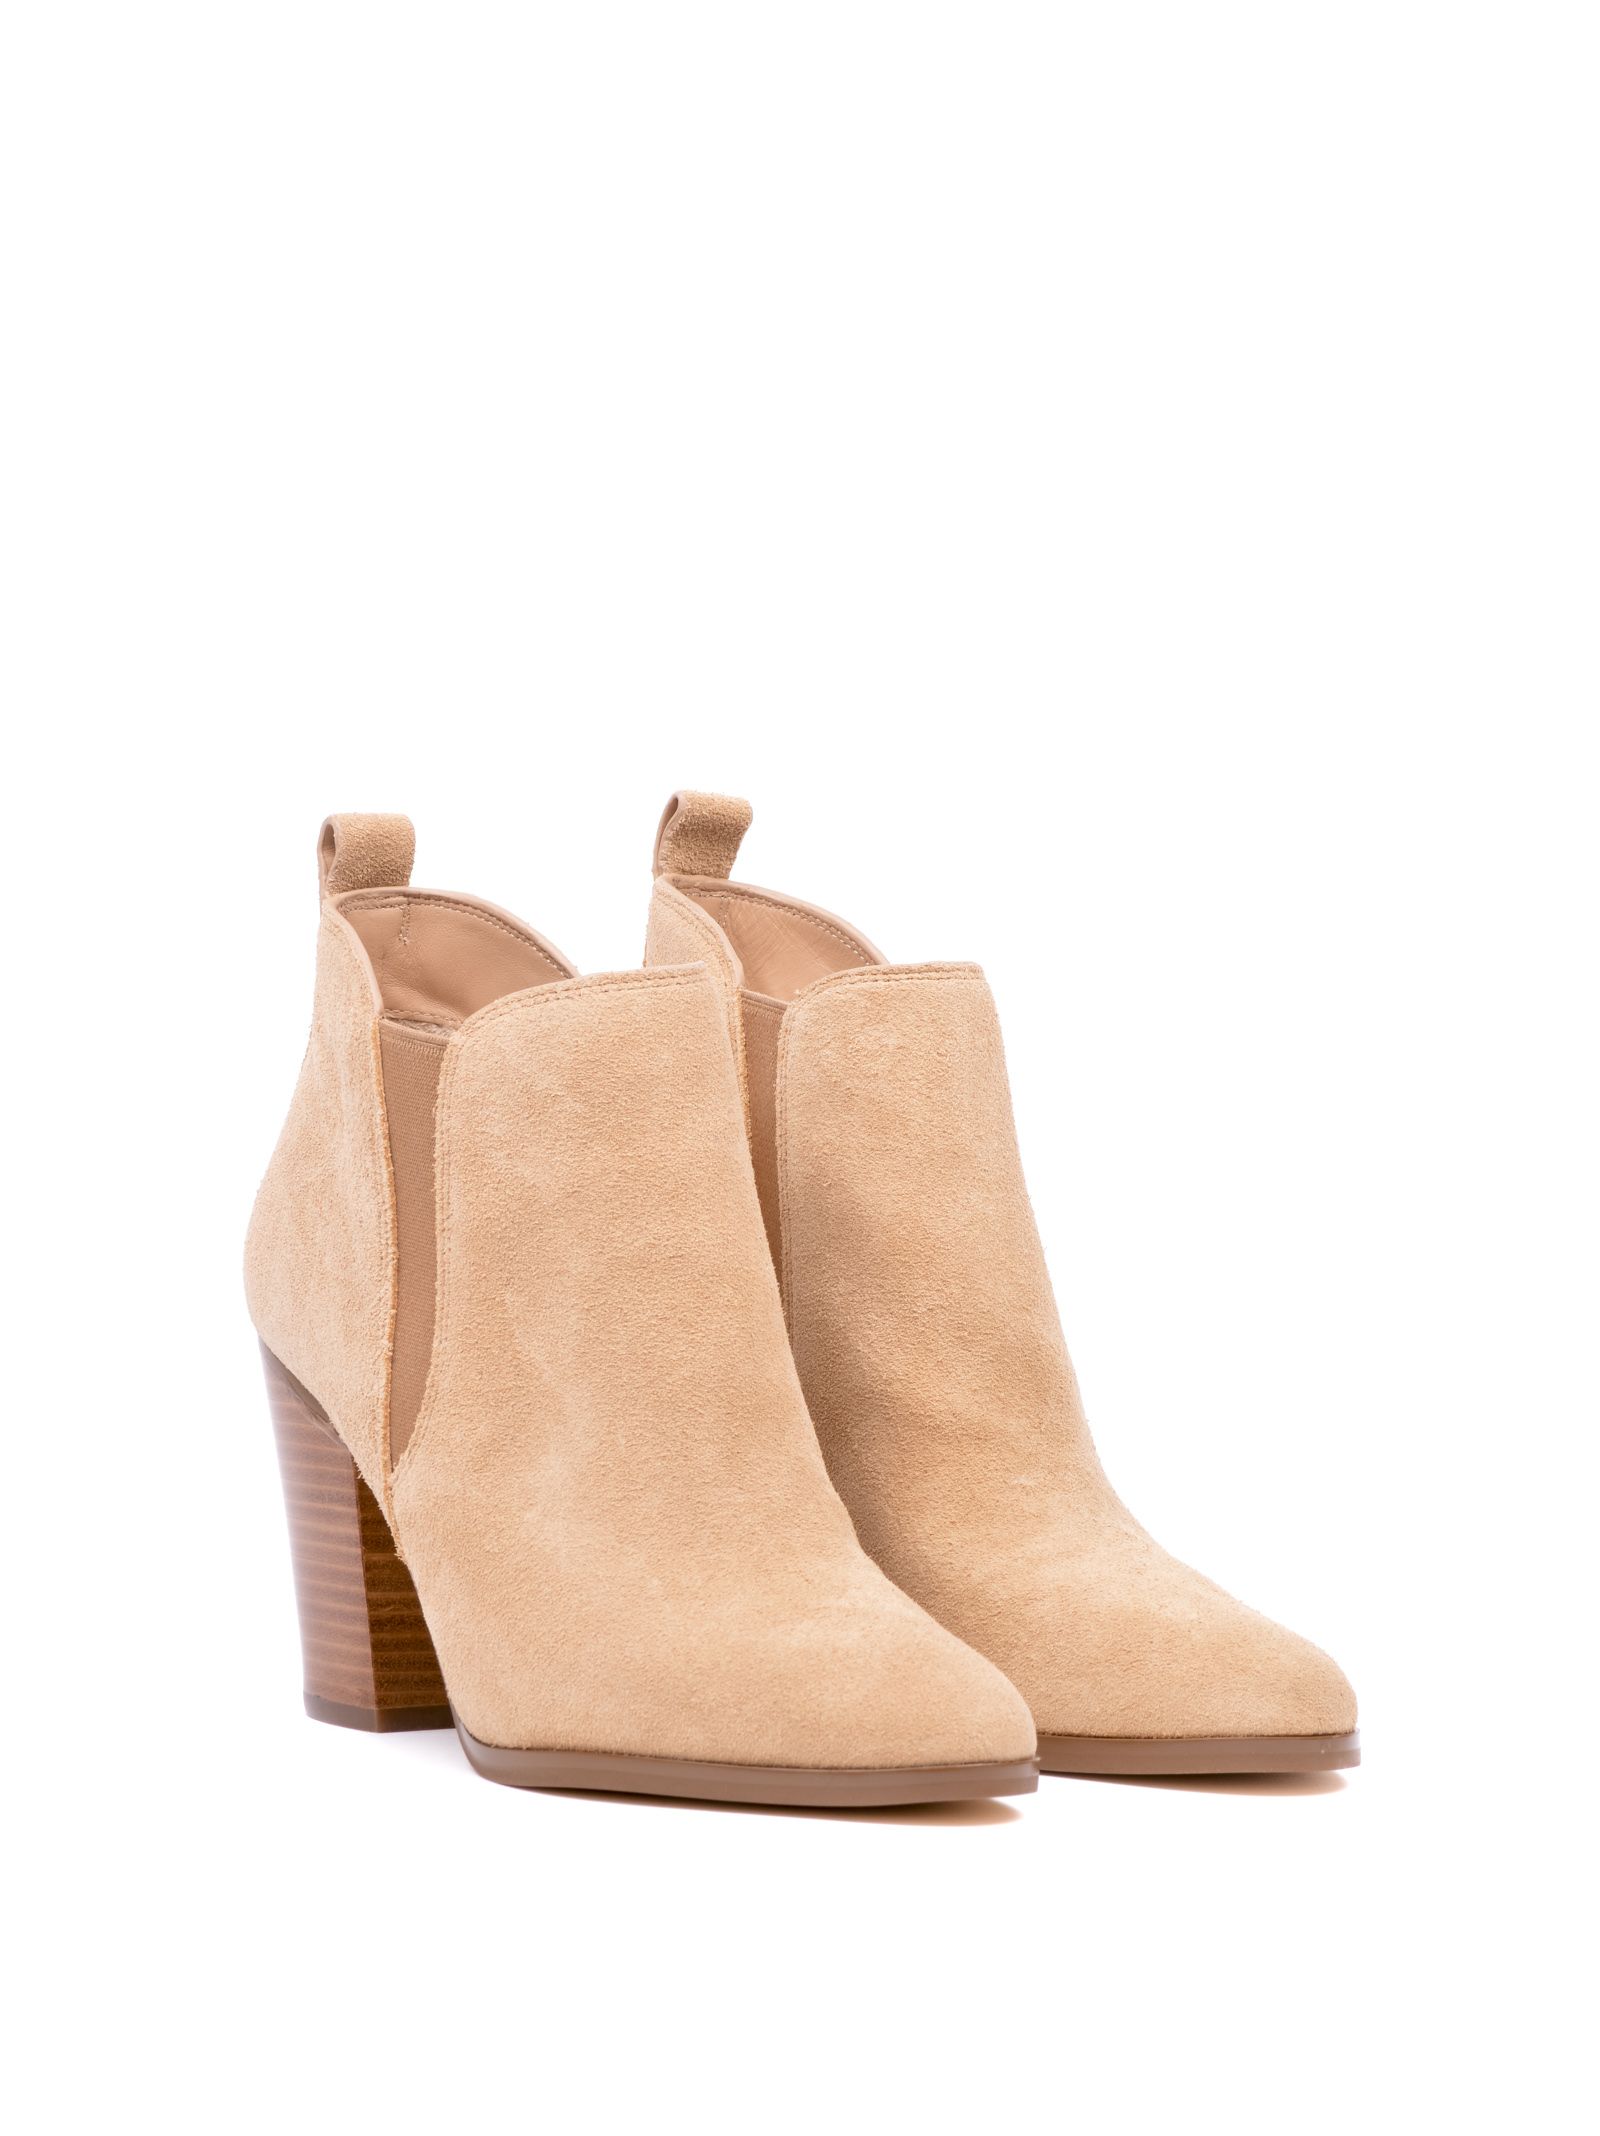 MICHAEL MICHAEL KORS Chunky Heel Ankle Boots in Toffee | ModeSens